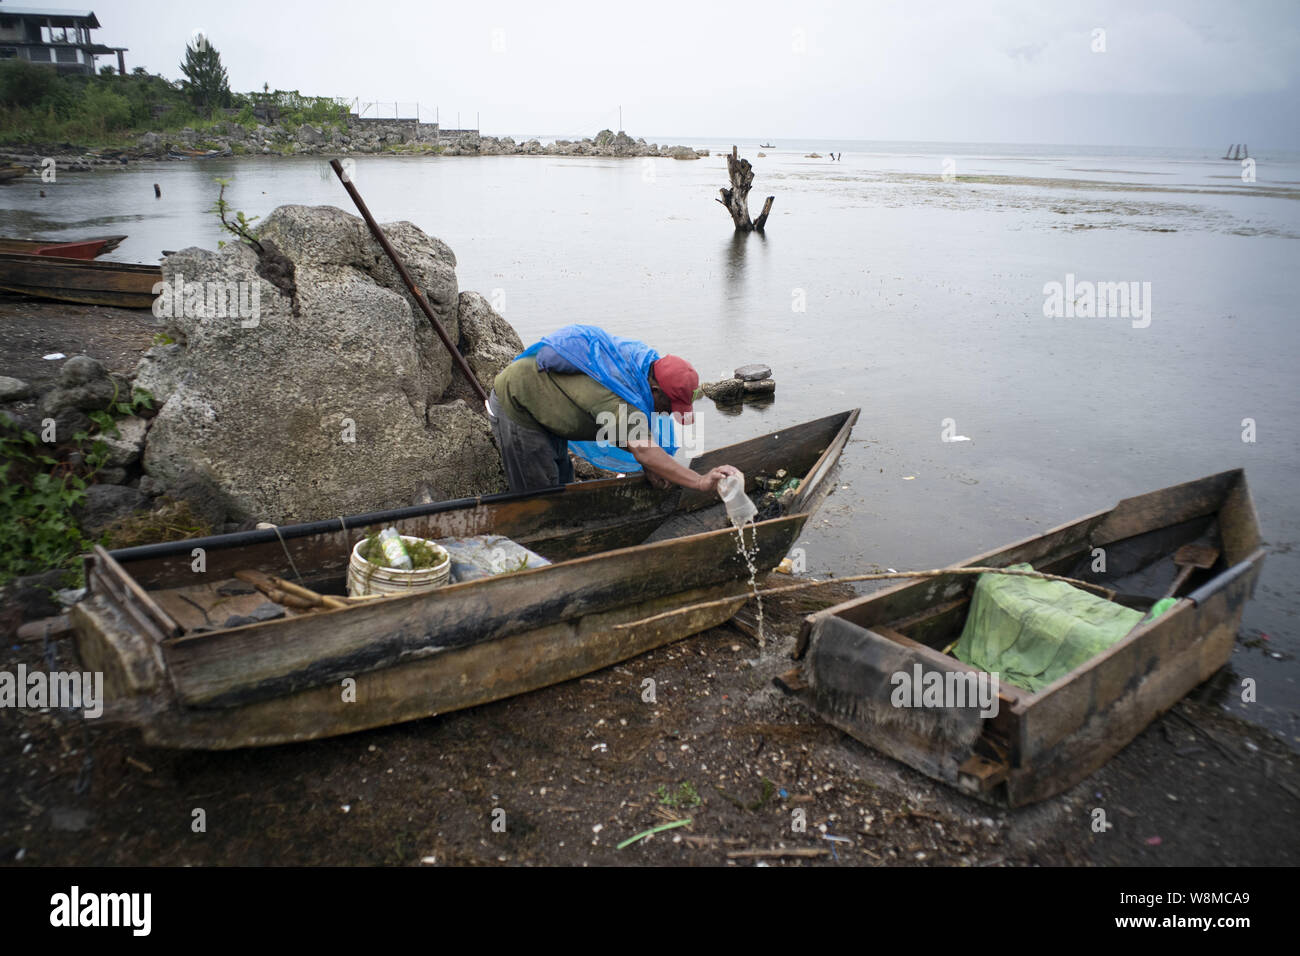 Cerro De Oro, Solola, Guatemala. 8th Aug, 2019. A fisherman bails water from a cayuco, an old Mayan boat at Cerro de Oro on the shores of Lake Atitlan, Solola Guatemala. The lake, surrounded by volcanoes, is highly polluted due to the lack of sanitation in almost all villages surrounding the lake. Credit: Bob Daemmrich/ZUMA Wire/Alamy Live News Stock Photo